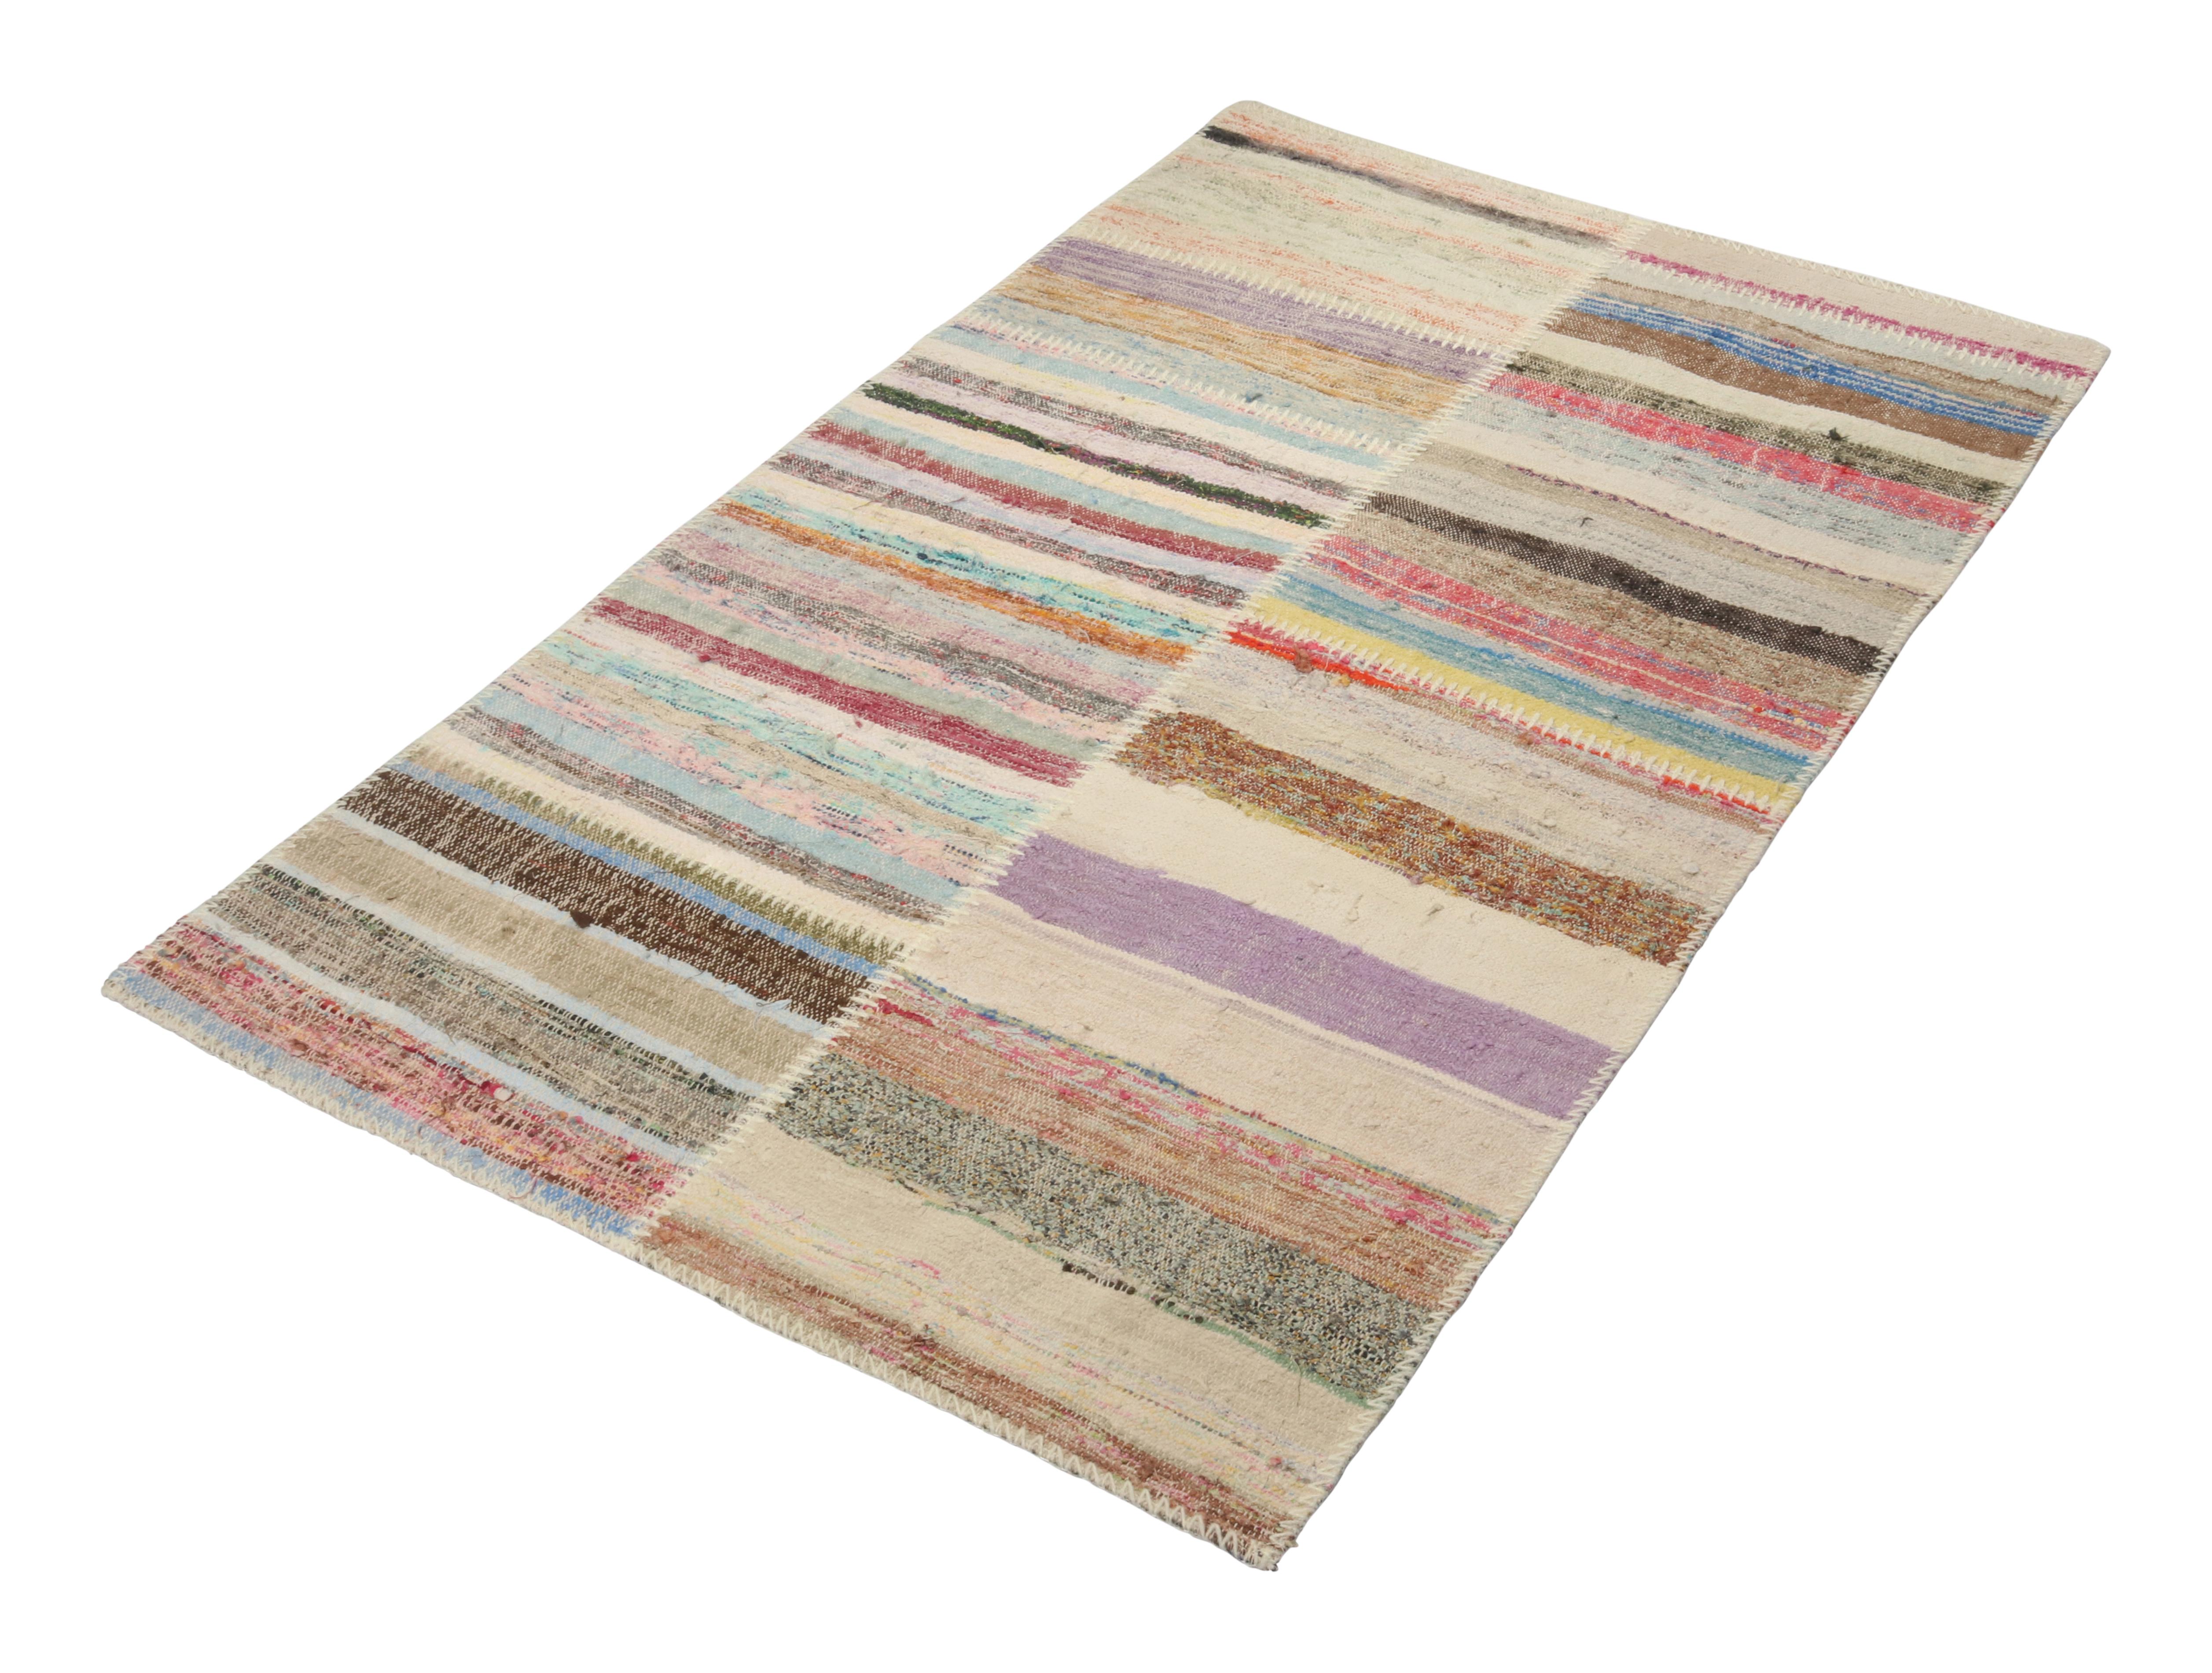 Handwoven in wool, Rug & Kilim presents a 3x5 contemporary rug from their innovative new patchwork kilim collection. 

On the Design: 

This flat weave technique repurposes vintage yarns in polychromatic stripes and striae, achieving a playful look